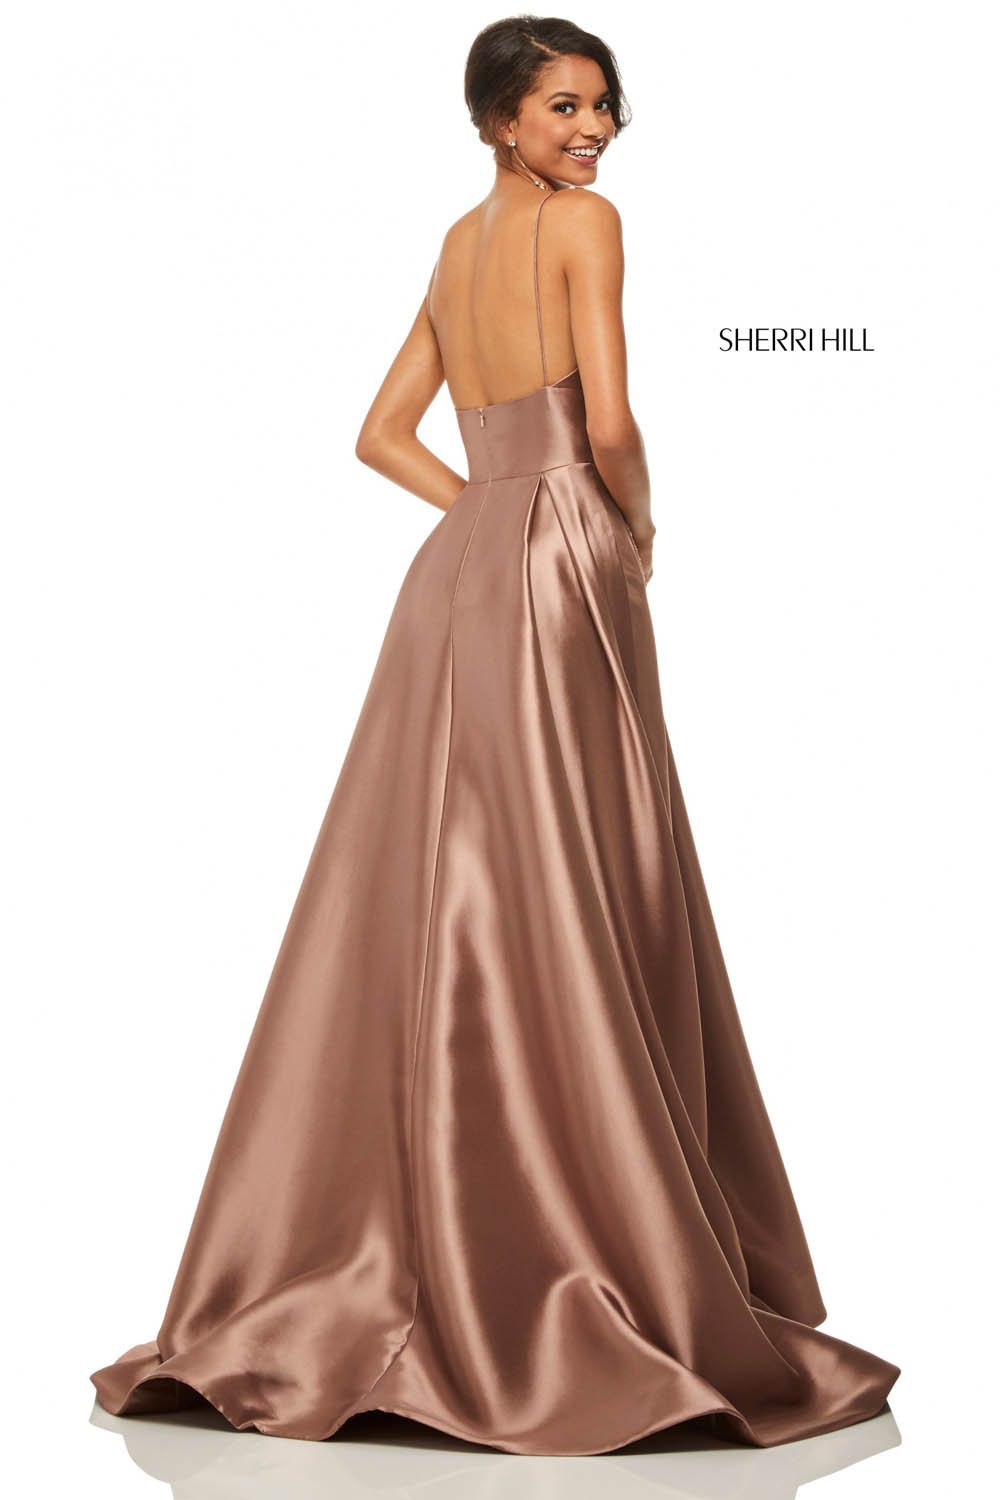 Sherri Hill 52597 dress images in these colors: Emerald, Coral, Navy, Yellow, Red, Blush, Black, Violet, Light Blue, Mocha.